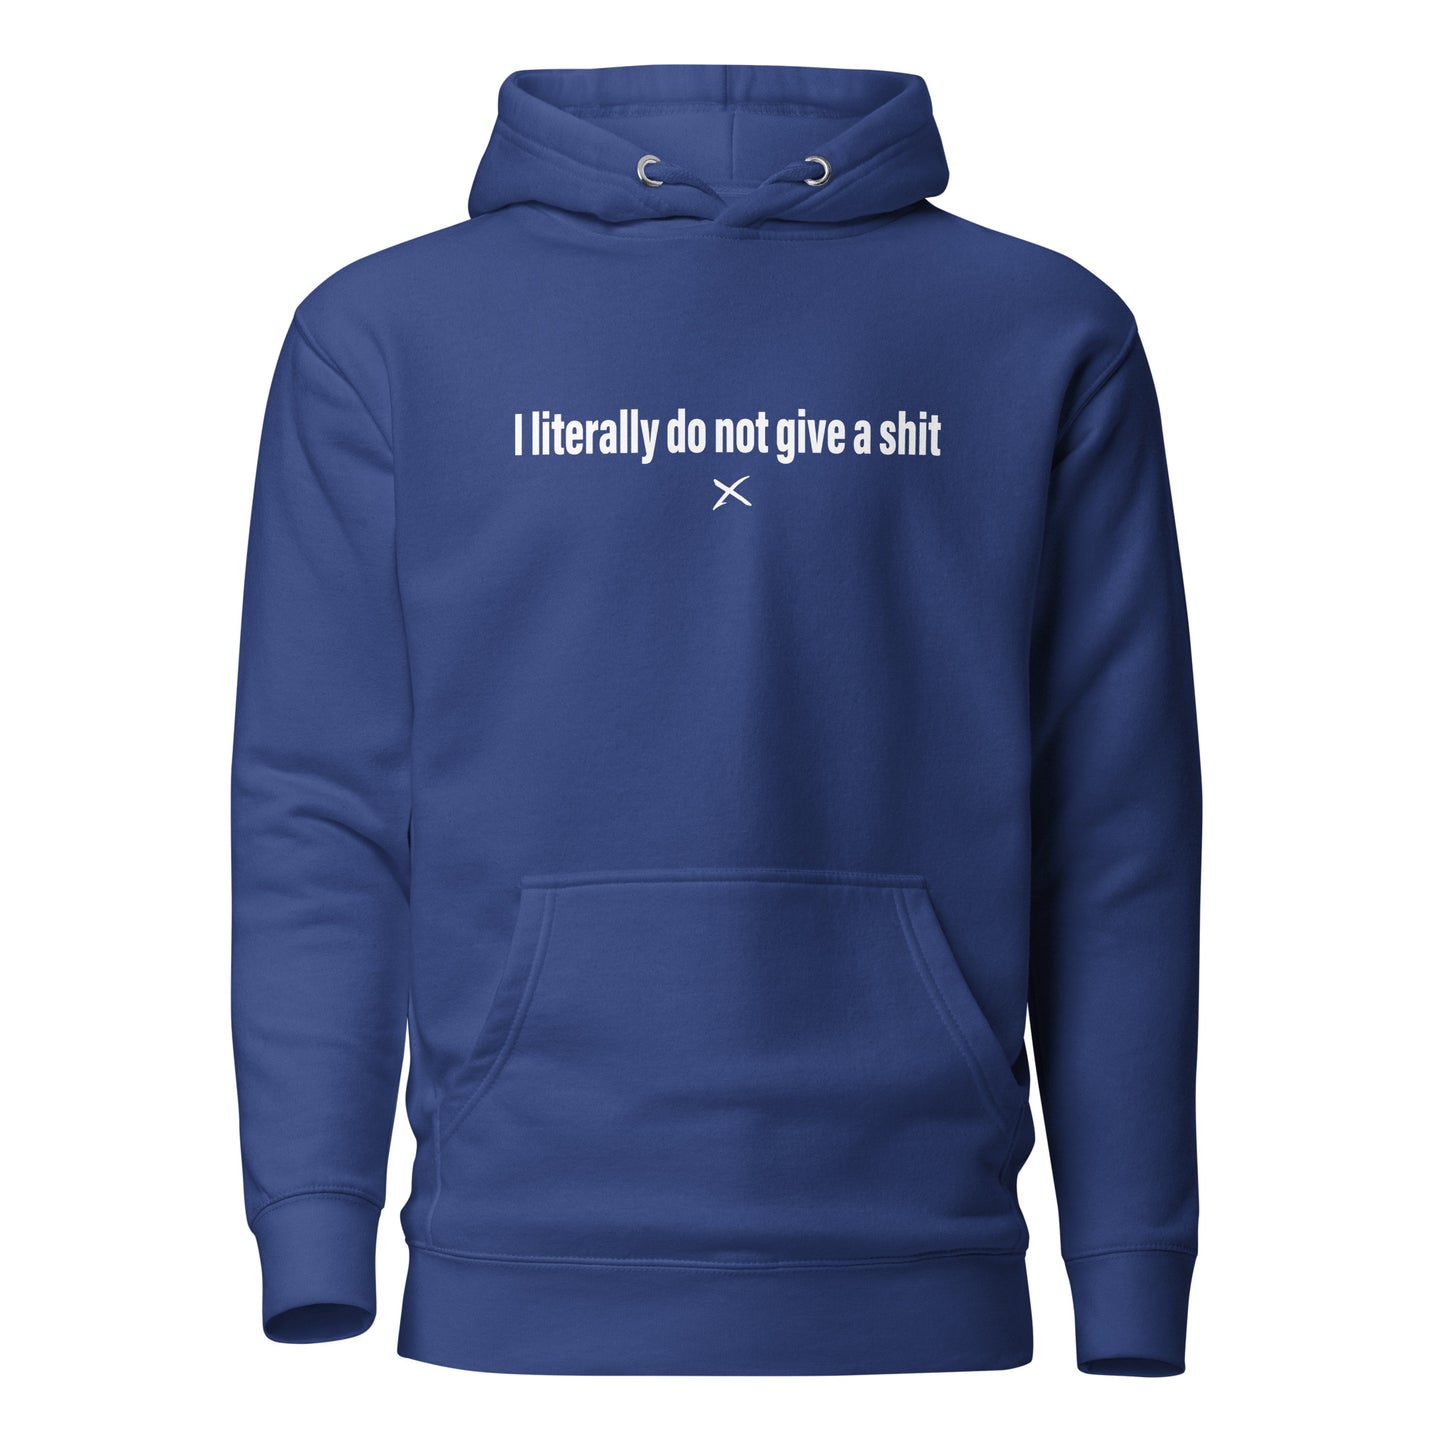 I literally do not give a shit - Hoodie